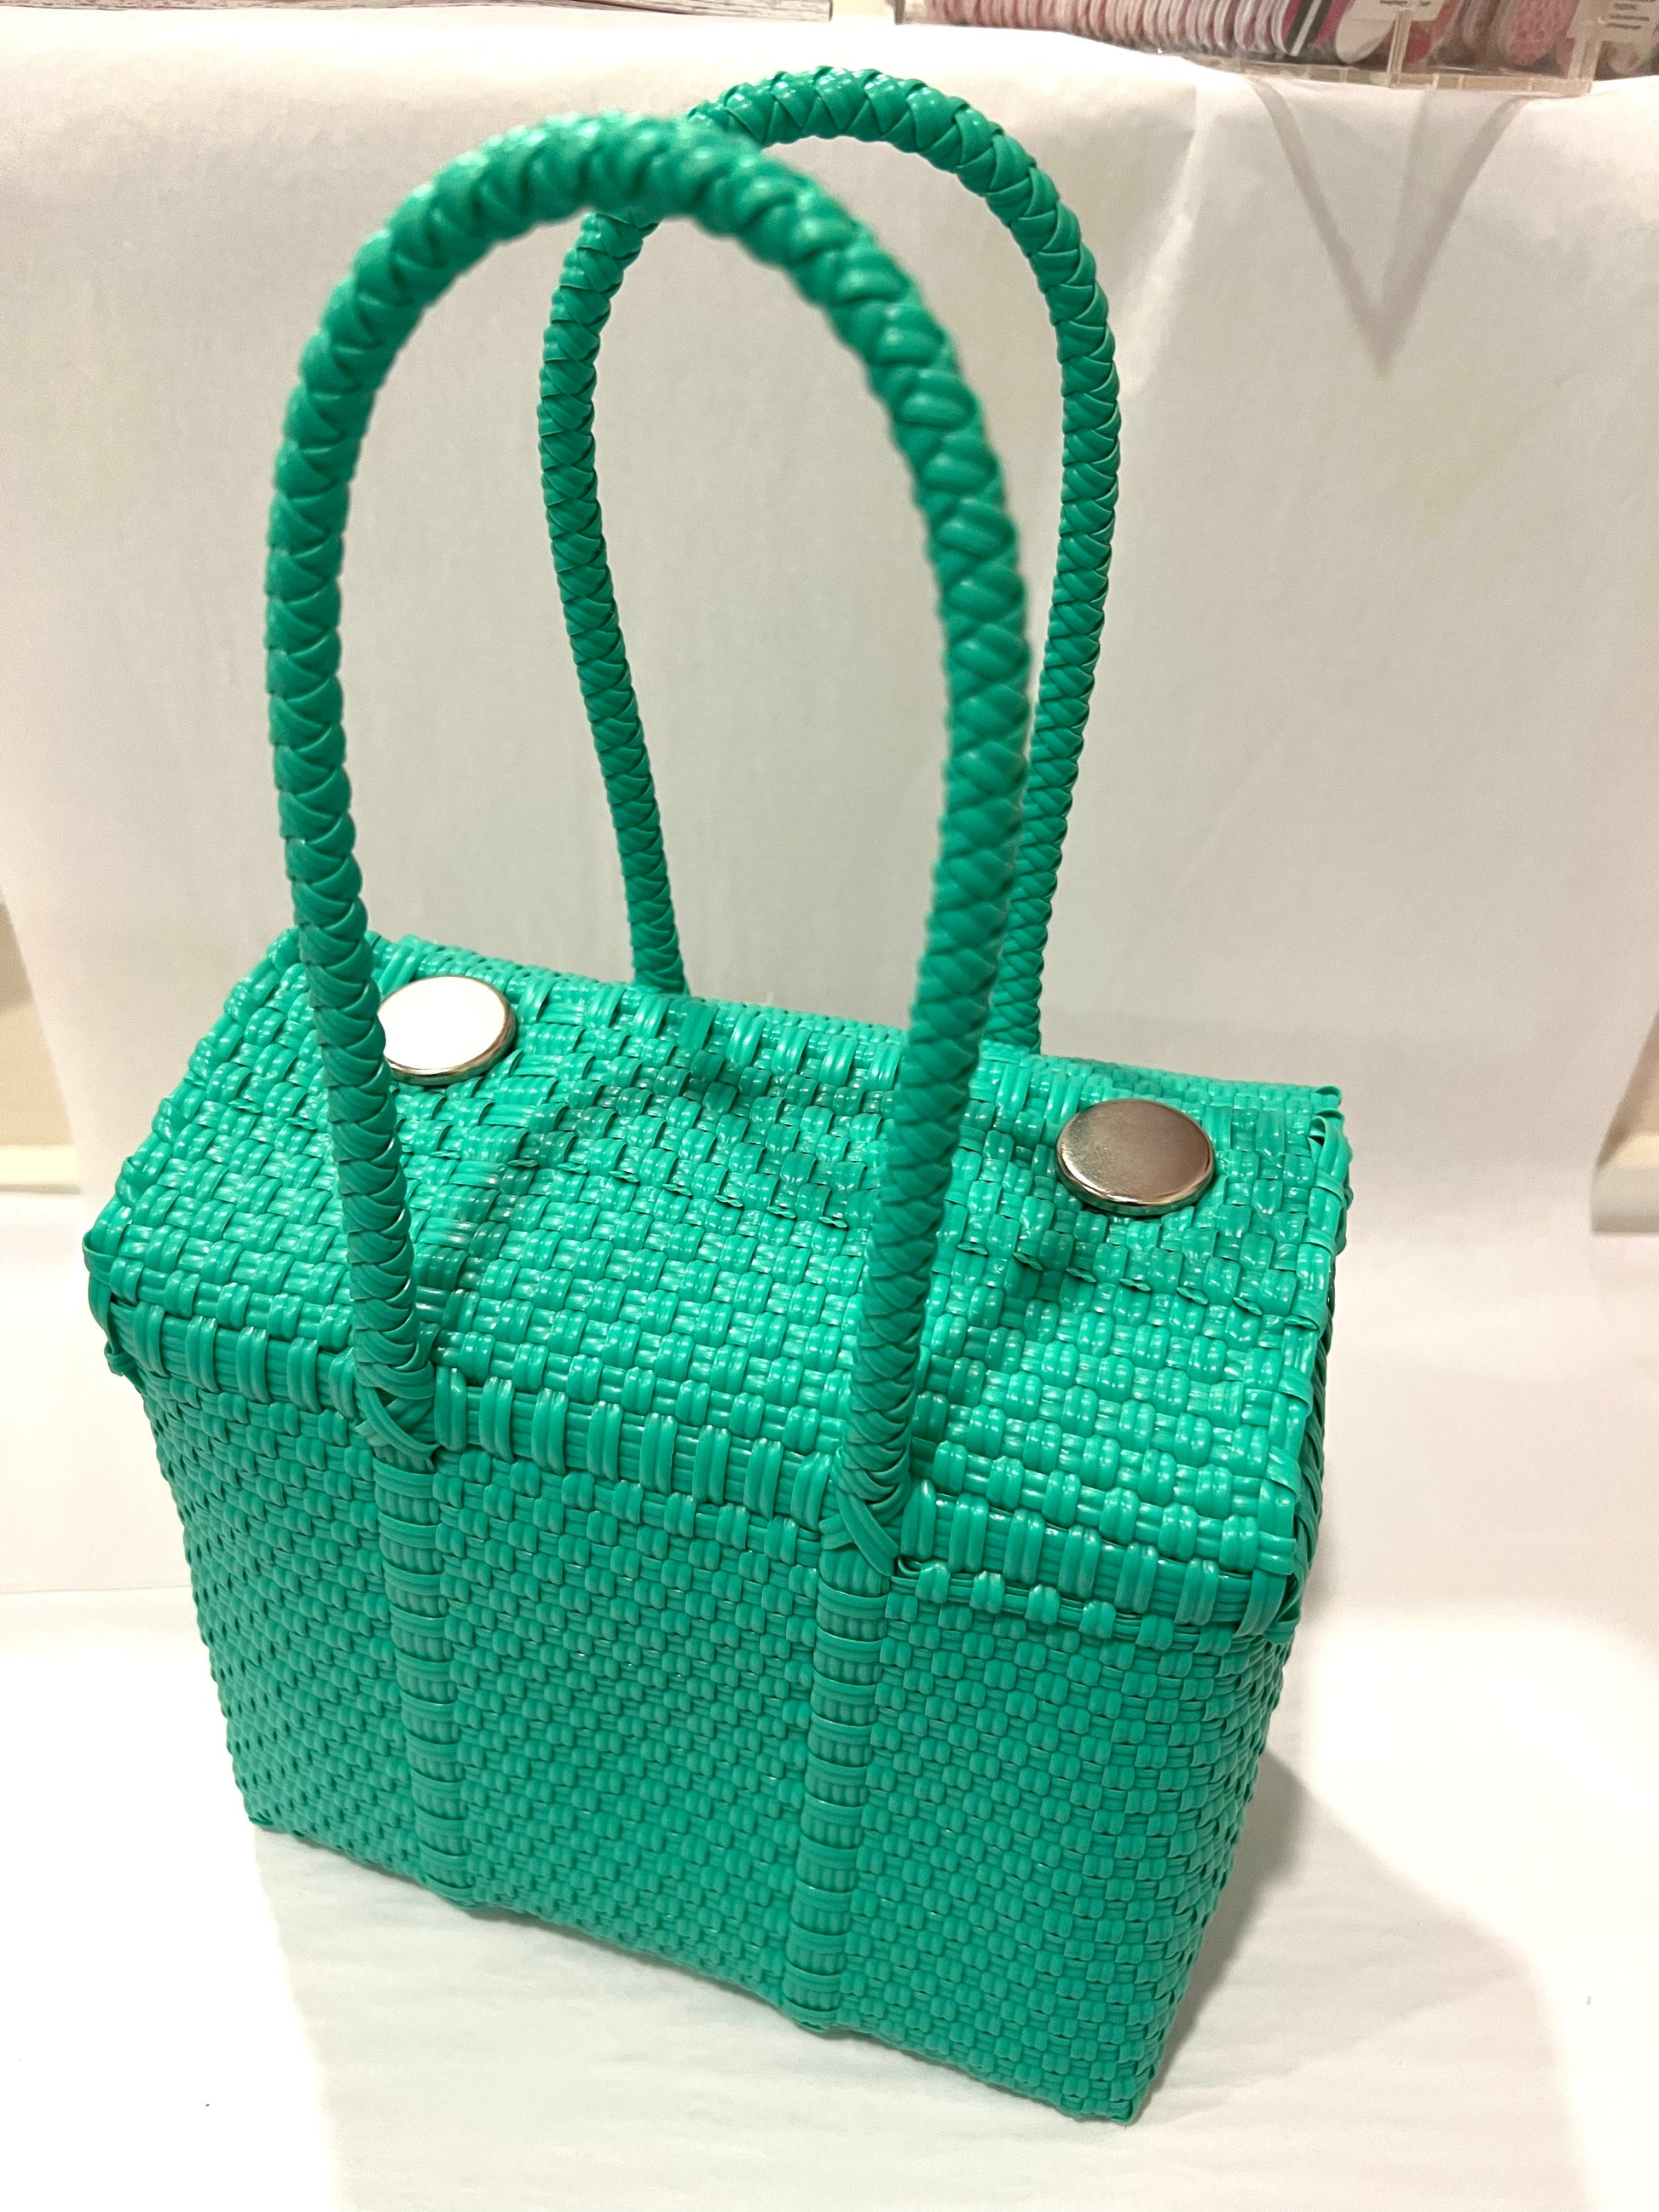 Rejolly Women's Straw Tote Bag